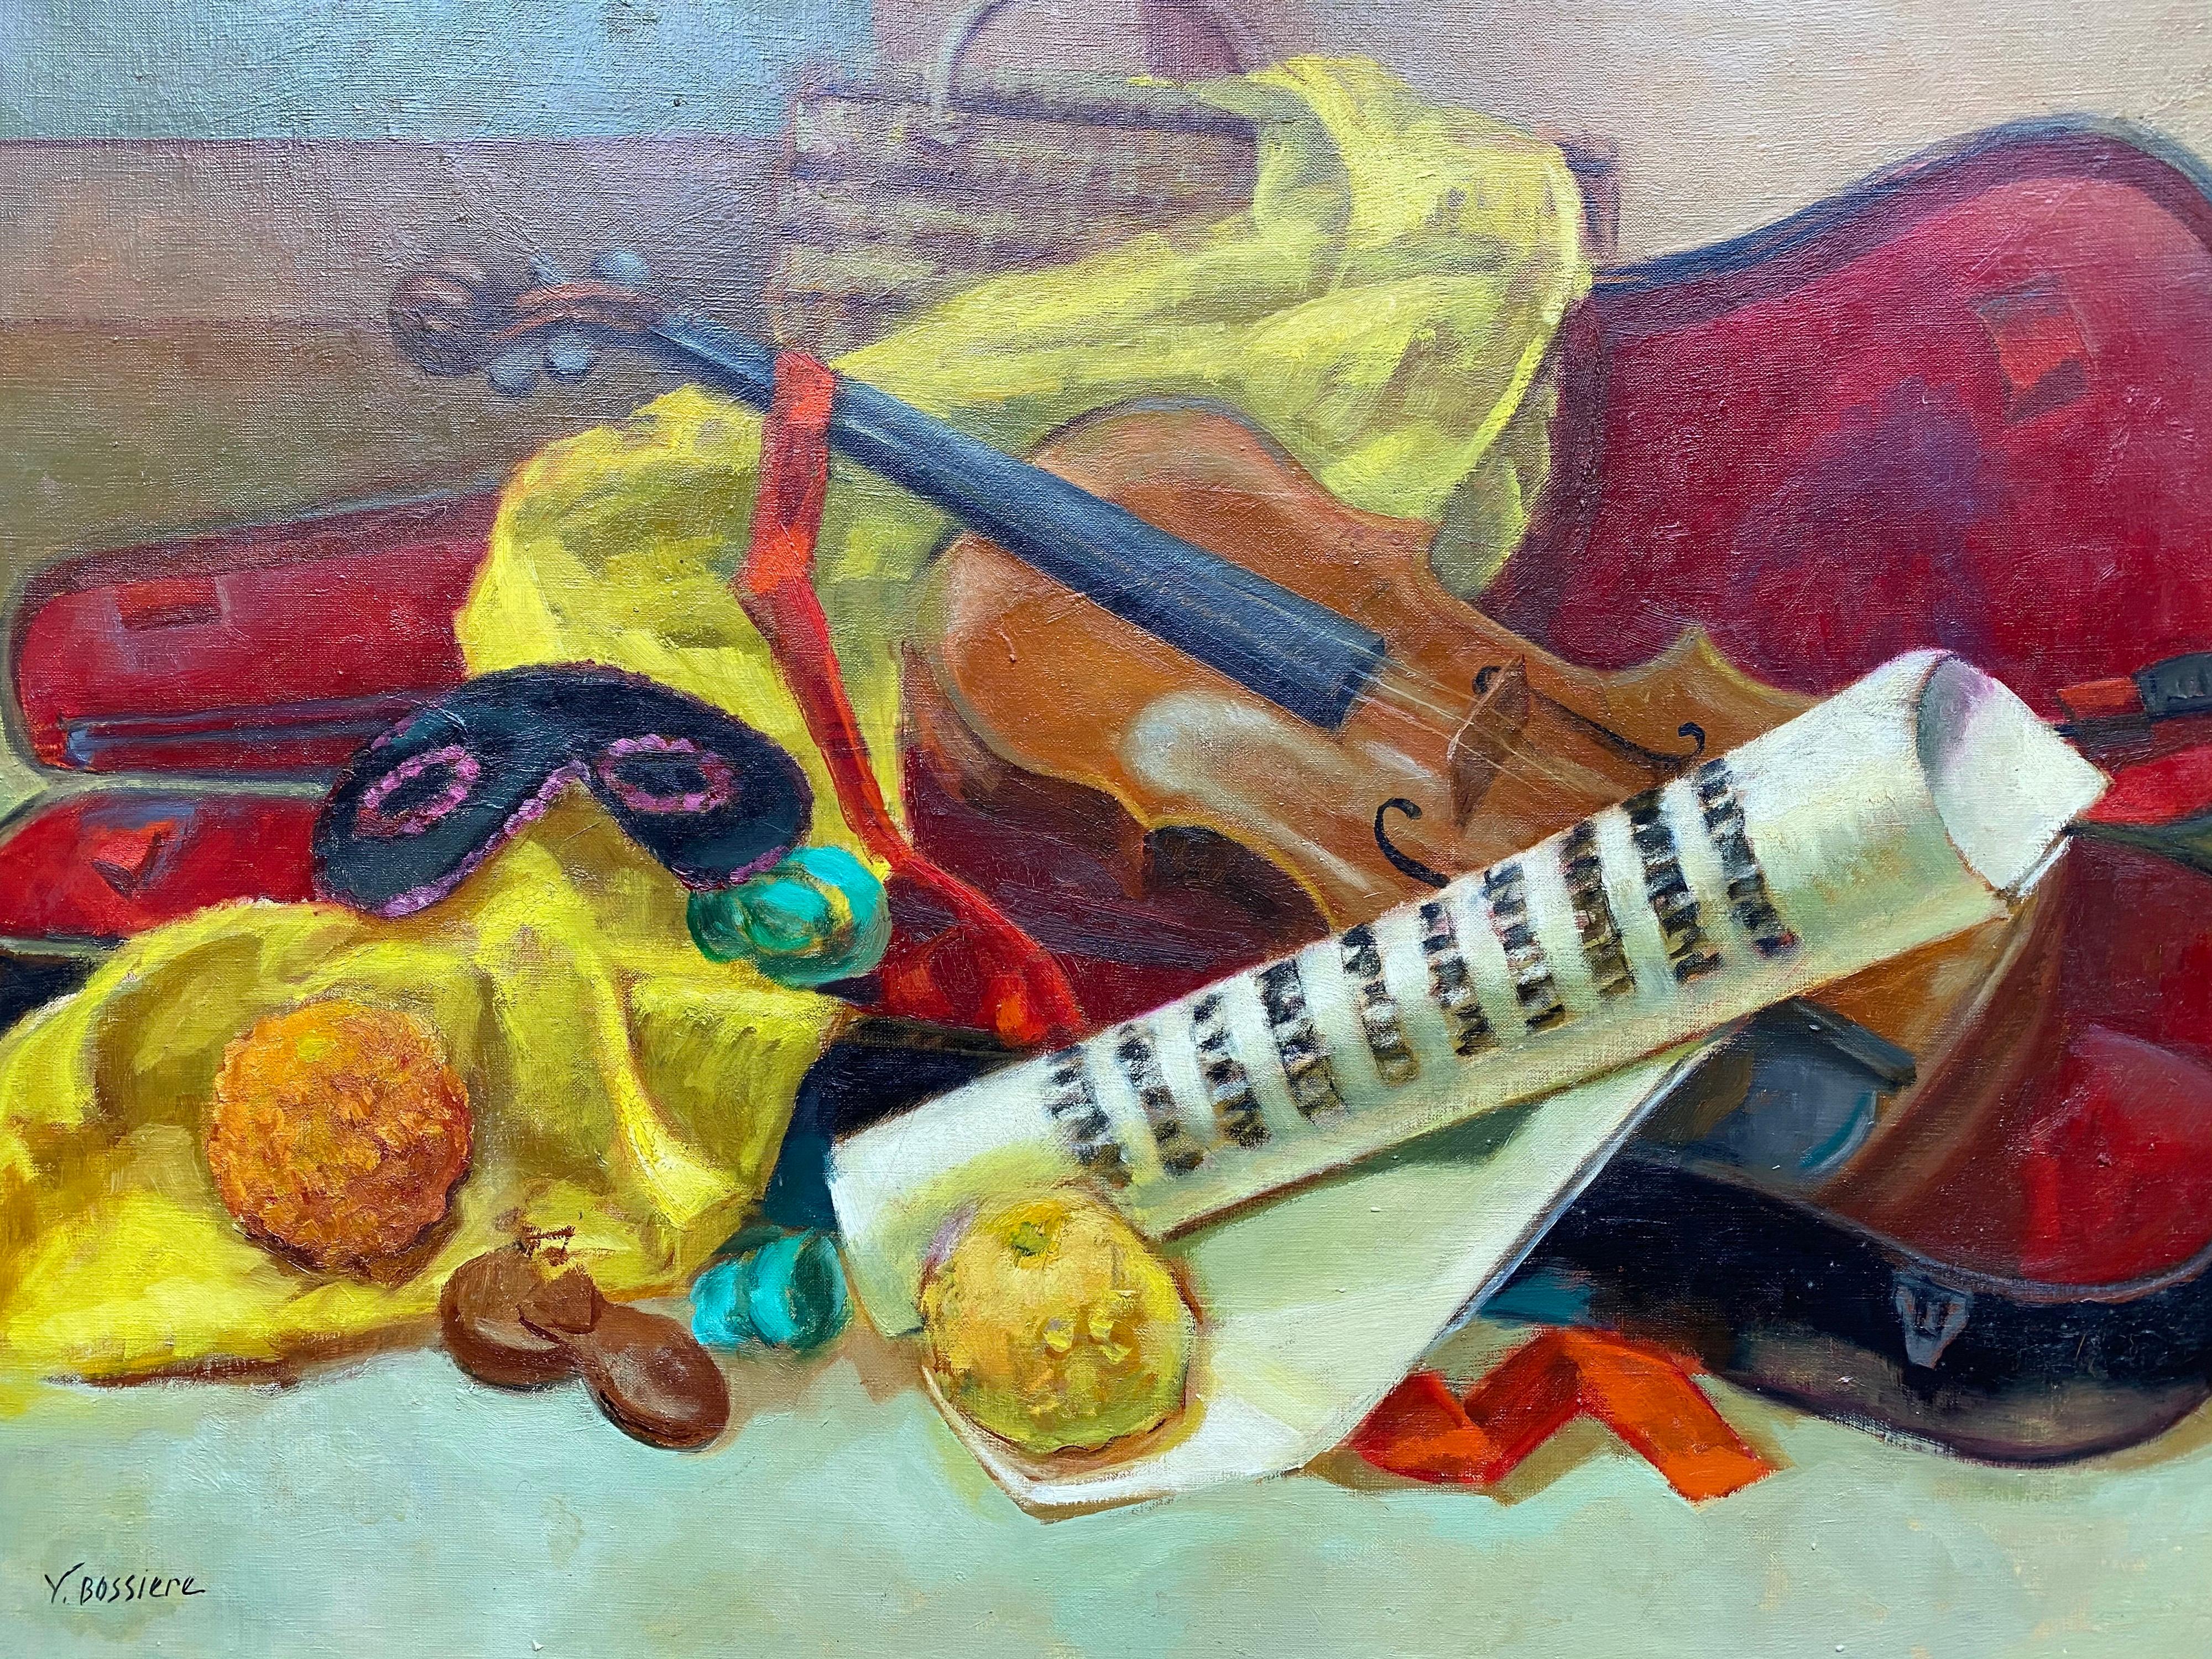 Colourful 20th Century French Impressionist - Musicians Violin Masque Still Life - Painting by Yvette Bossiere